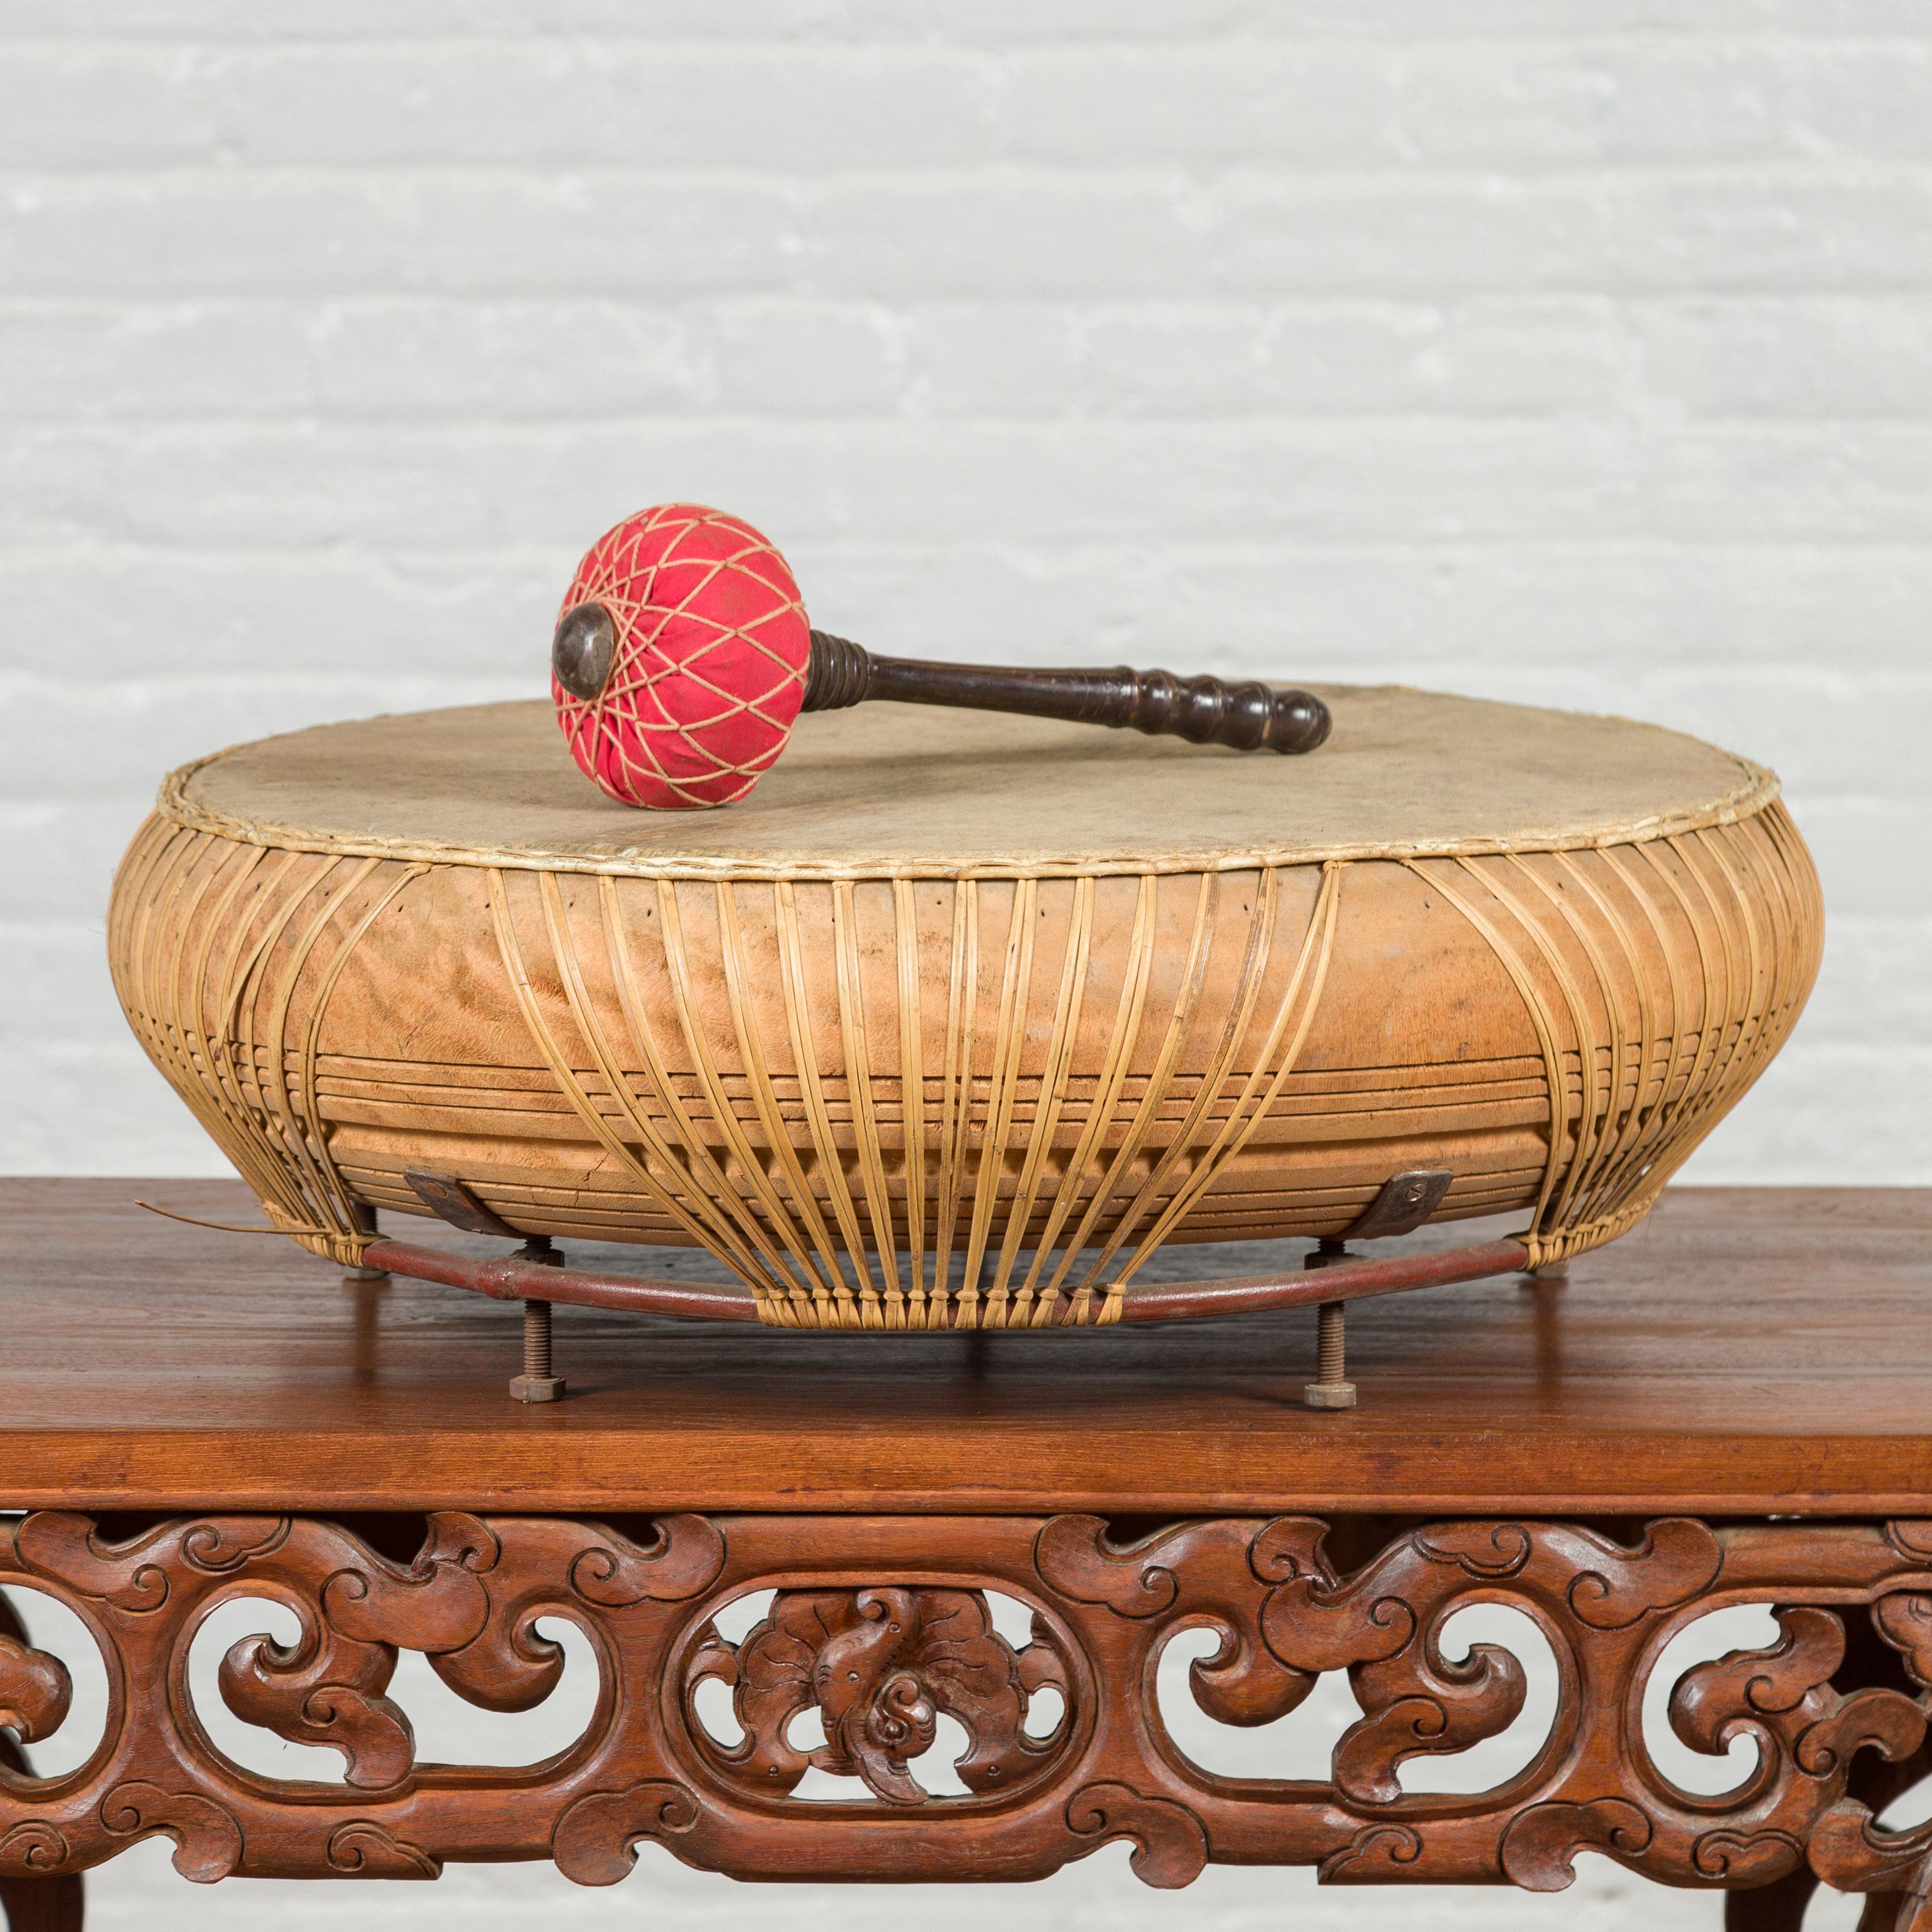 A Chinese Qing dynasty period leather drum from the 19th century, with turned wood red mallet. Created in China during the Qing dynasty, this round leather drum will make for an exquisite decorative accent in any home. Freestanding, it comes with